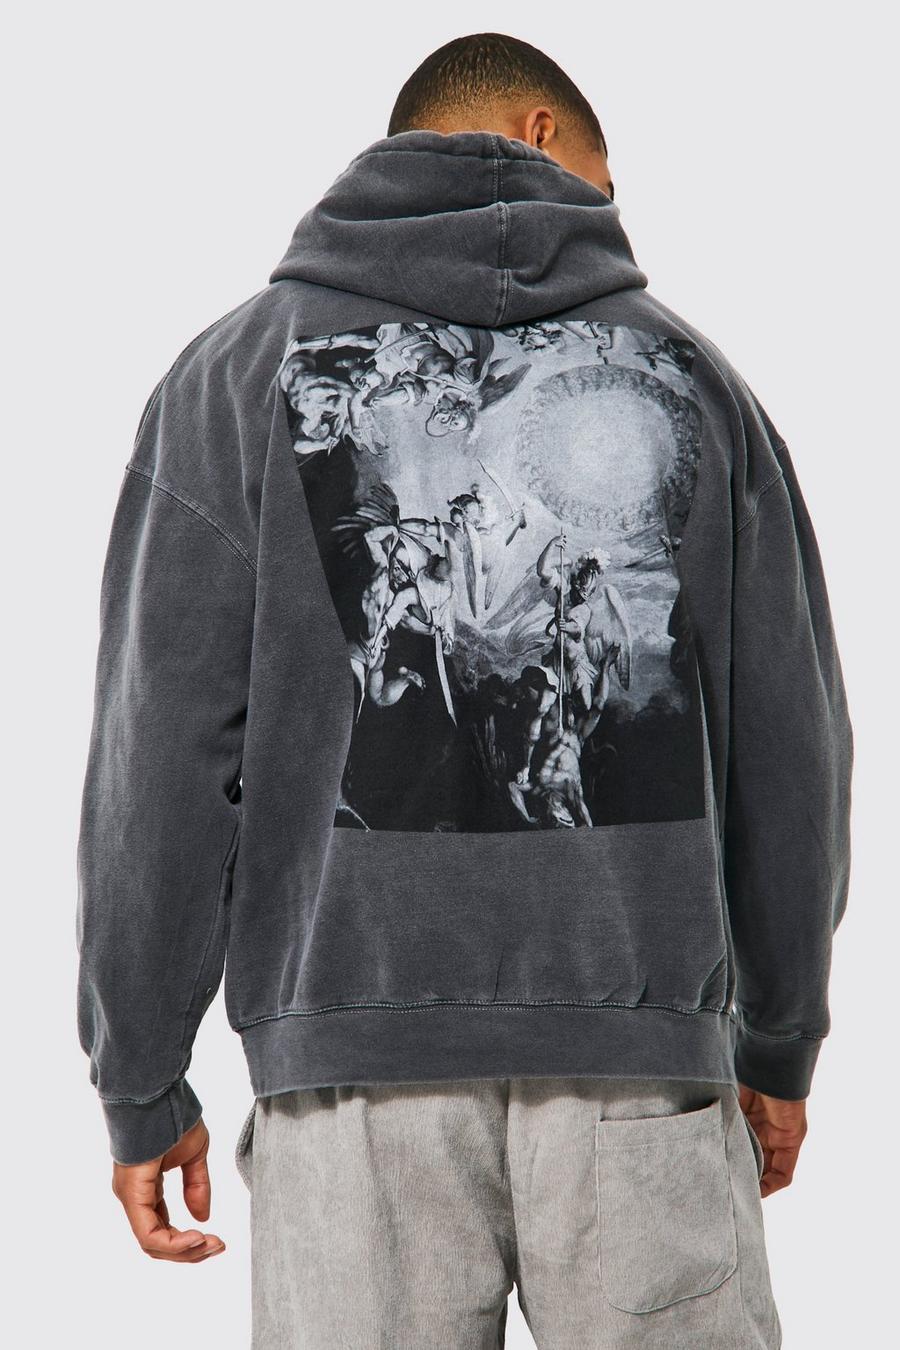 Charcoal grey Oversized Washed Renaissance Graphic Hoodie